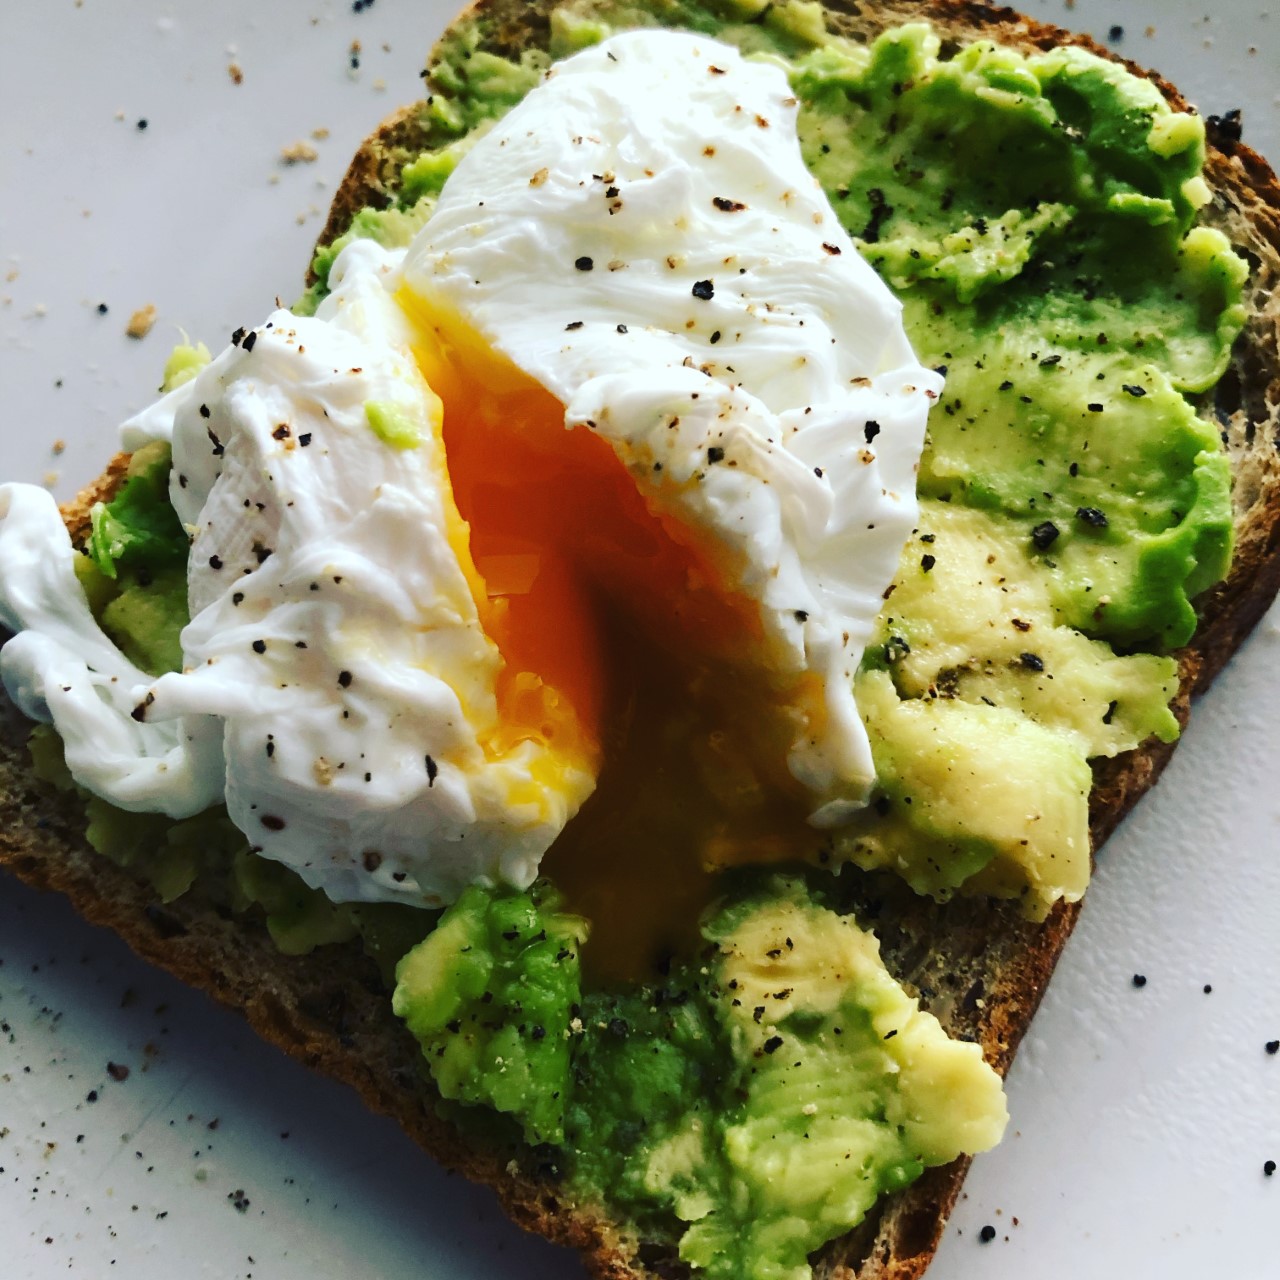 Crushed avocado and poached egg on toast